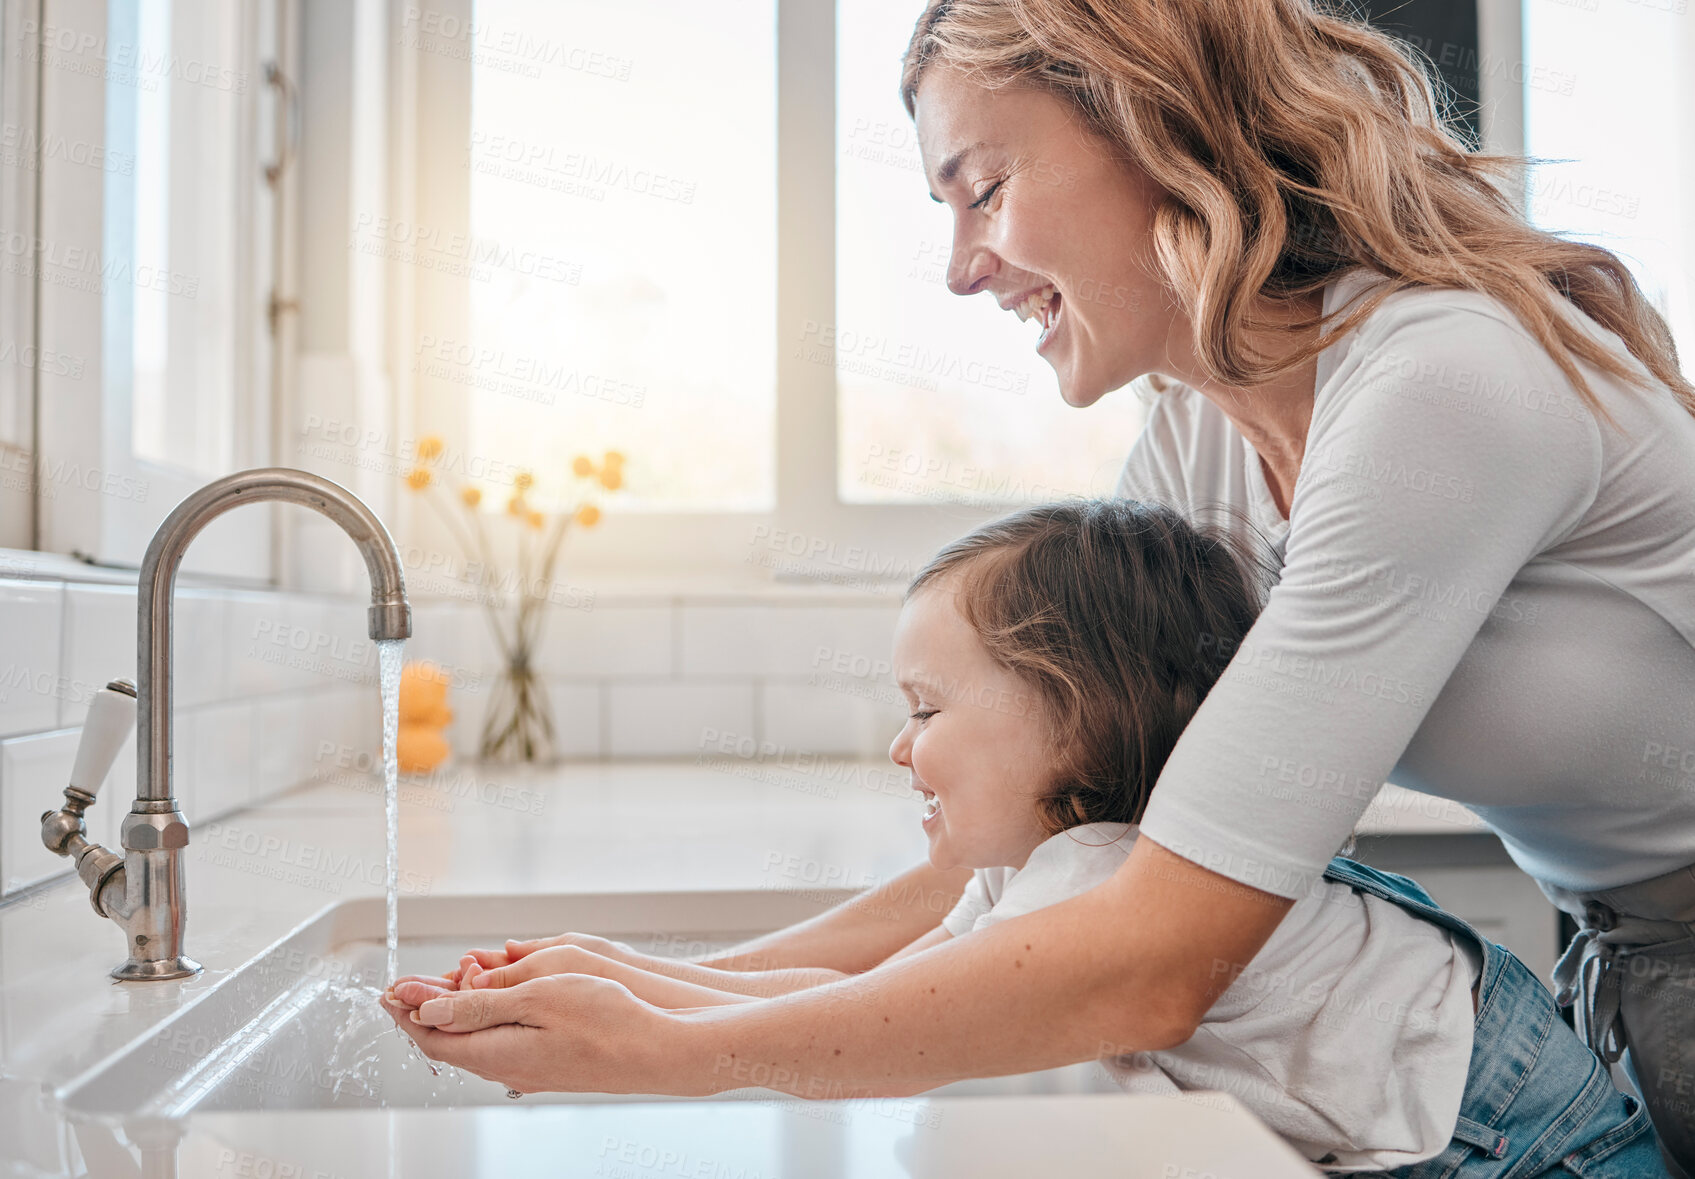 Buy stock photo Shot of a mother and daughter washing their hands in the kitchen